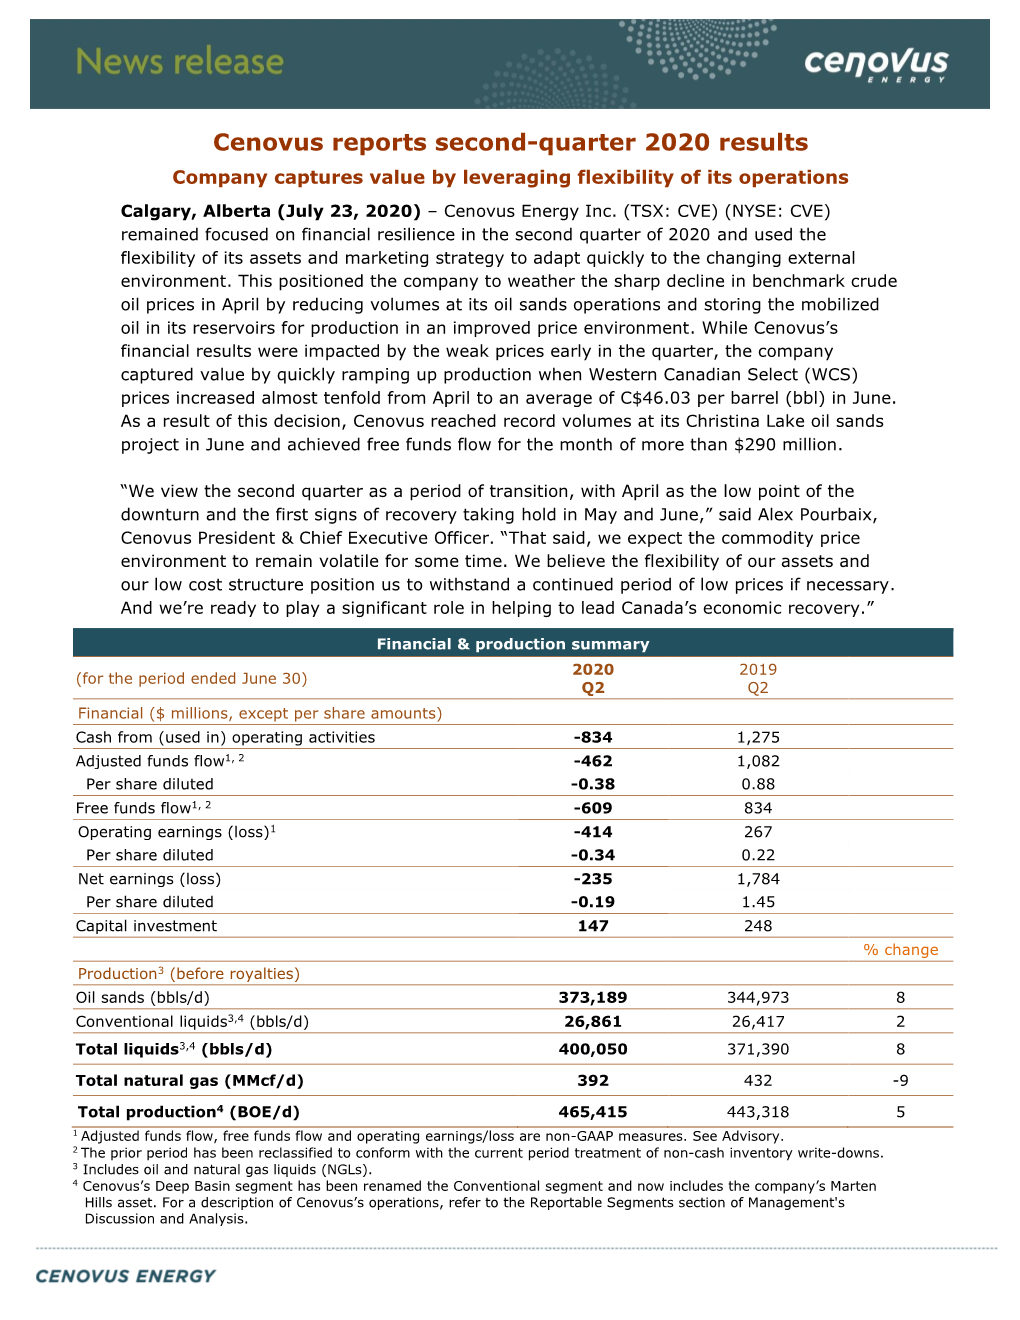 Cenovus Reports Second-Quarter 2020 Results Company Captures Value by Leveraging Flexibility of Its Operations Calgary, Alberta (July 23, 2020) – Cenovus Energy Inc